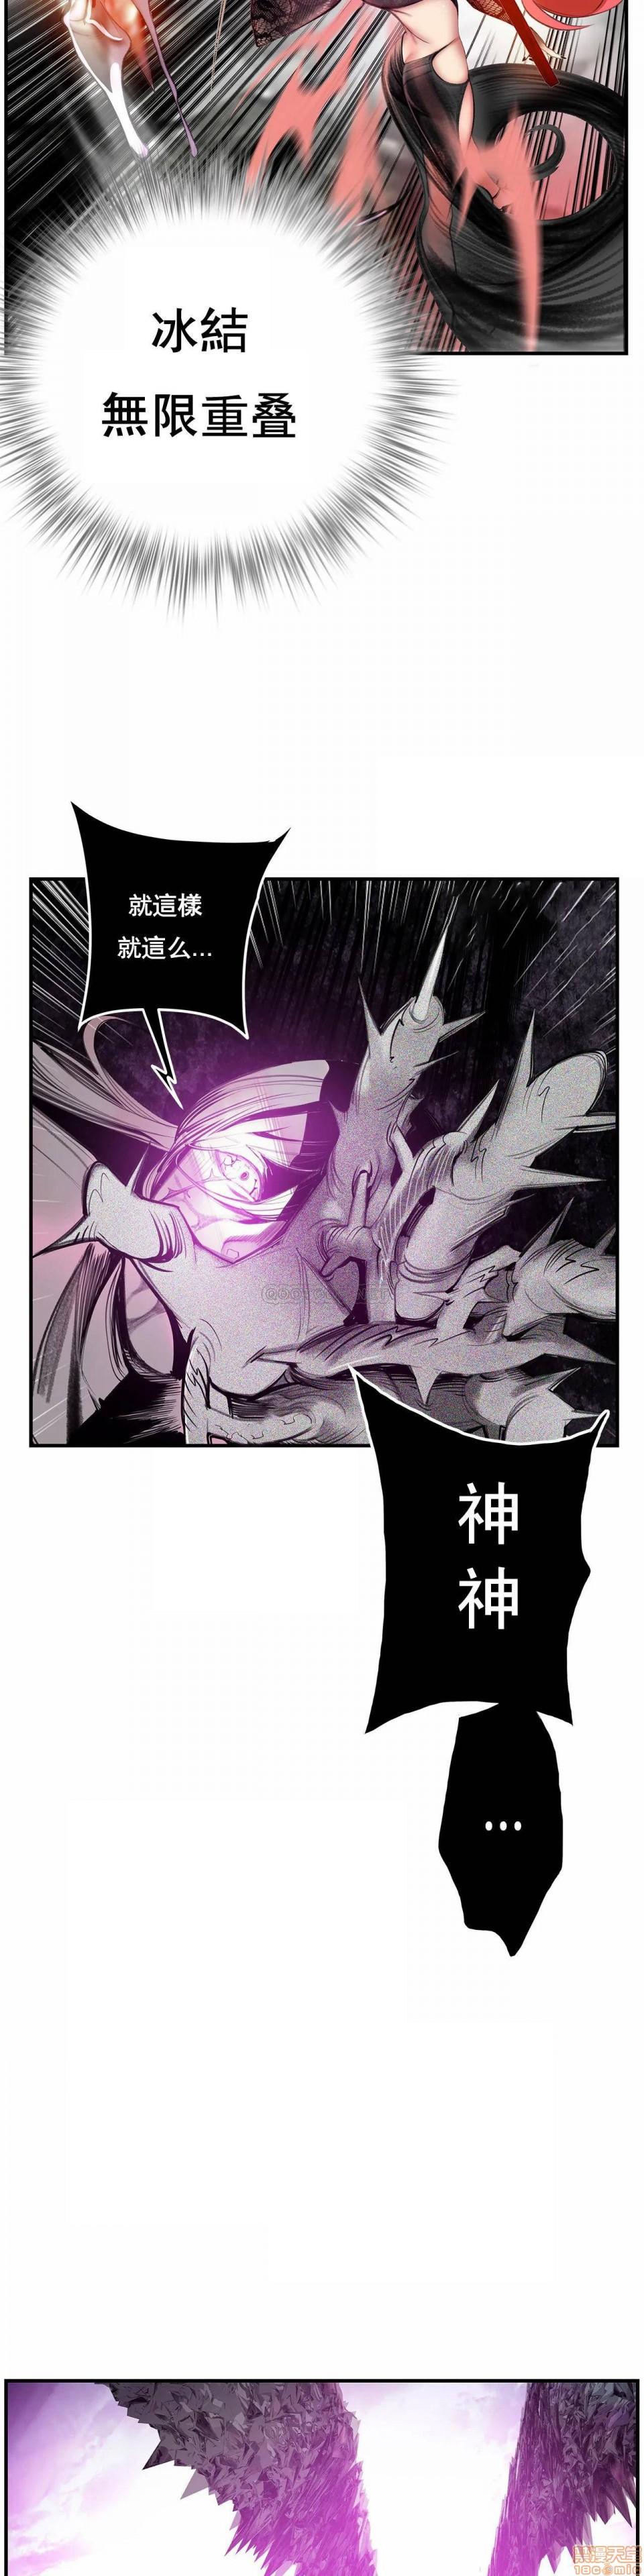 [Juder] Lilith`s Cord (第二季) Ch.77-93 end [Chinese] 137